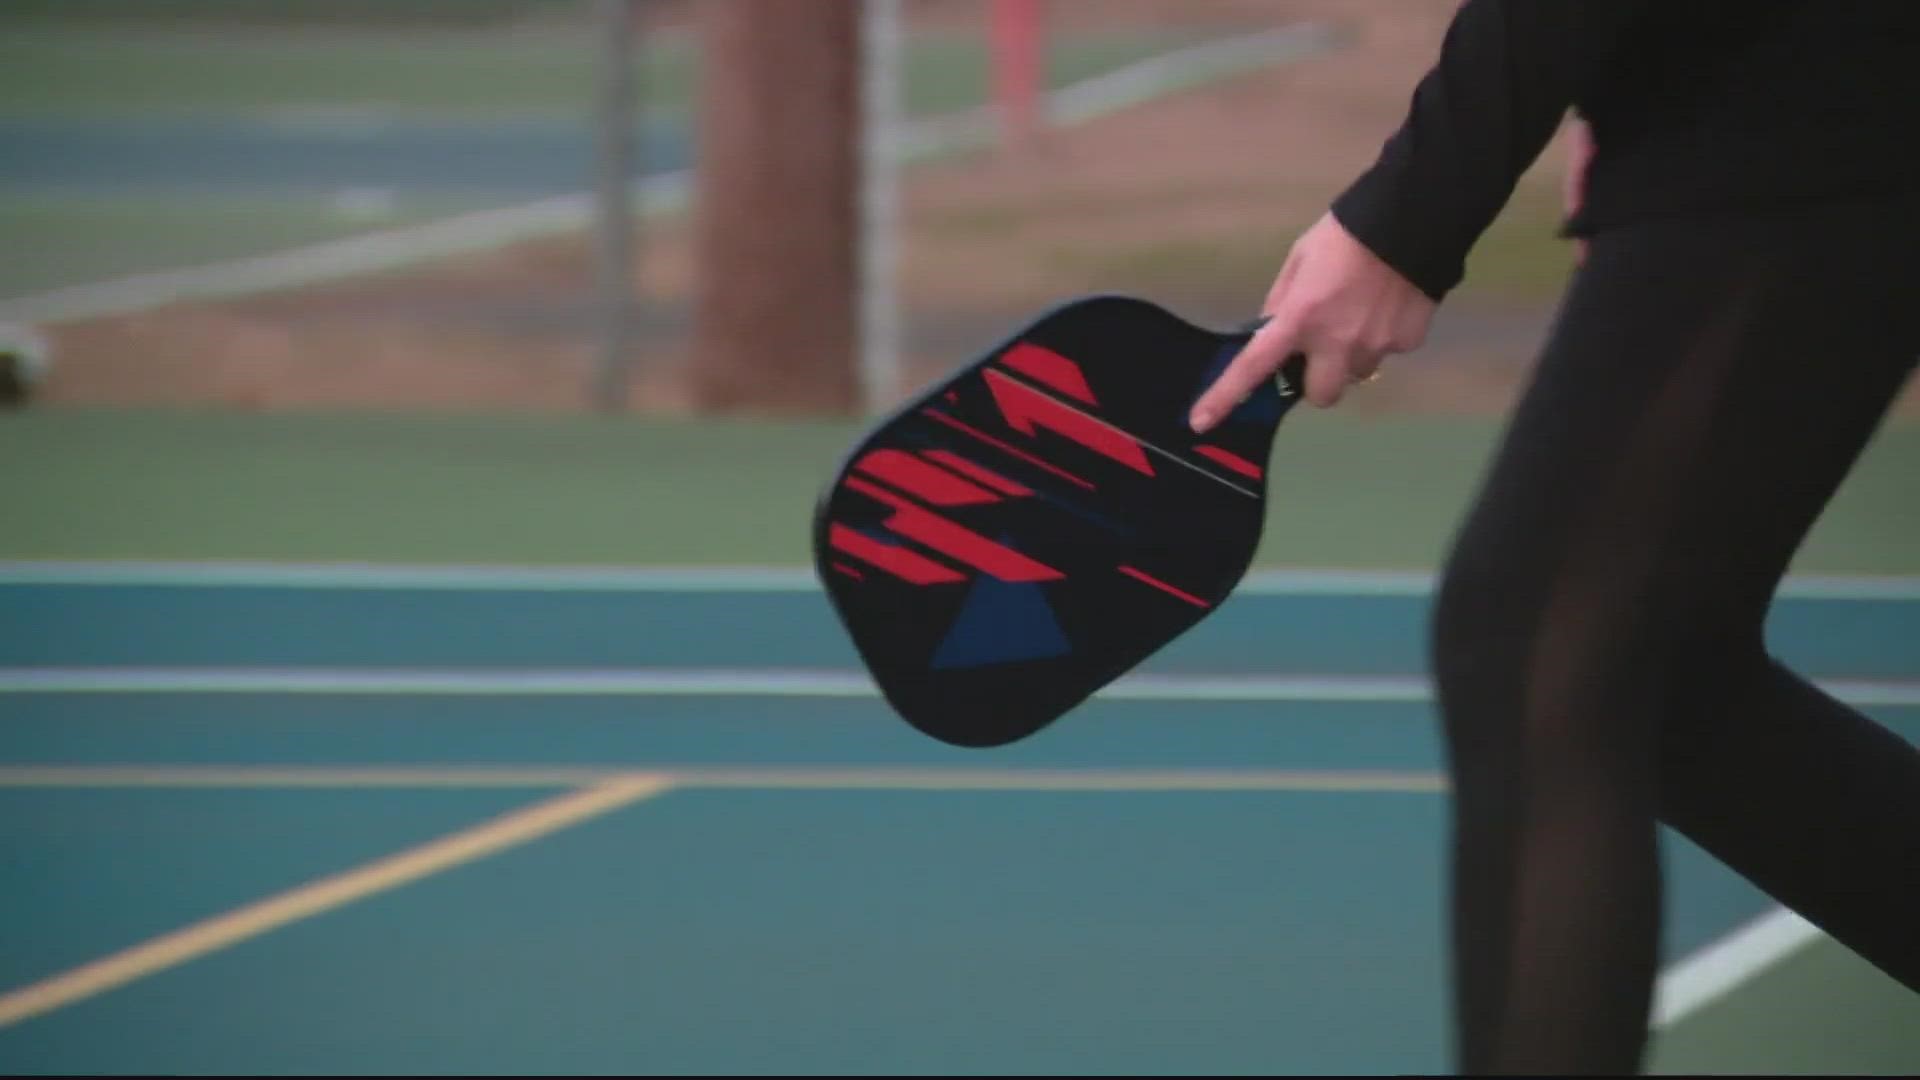 After noise complaints, pickleball players in Vienna, Virginia will only be play four days a week and only during certain hours.